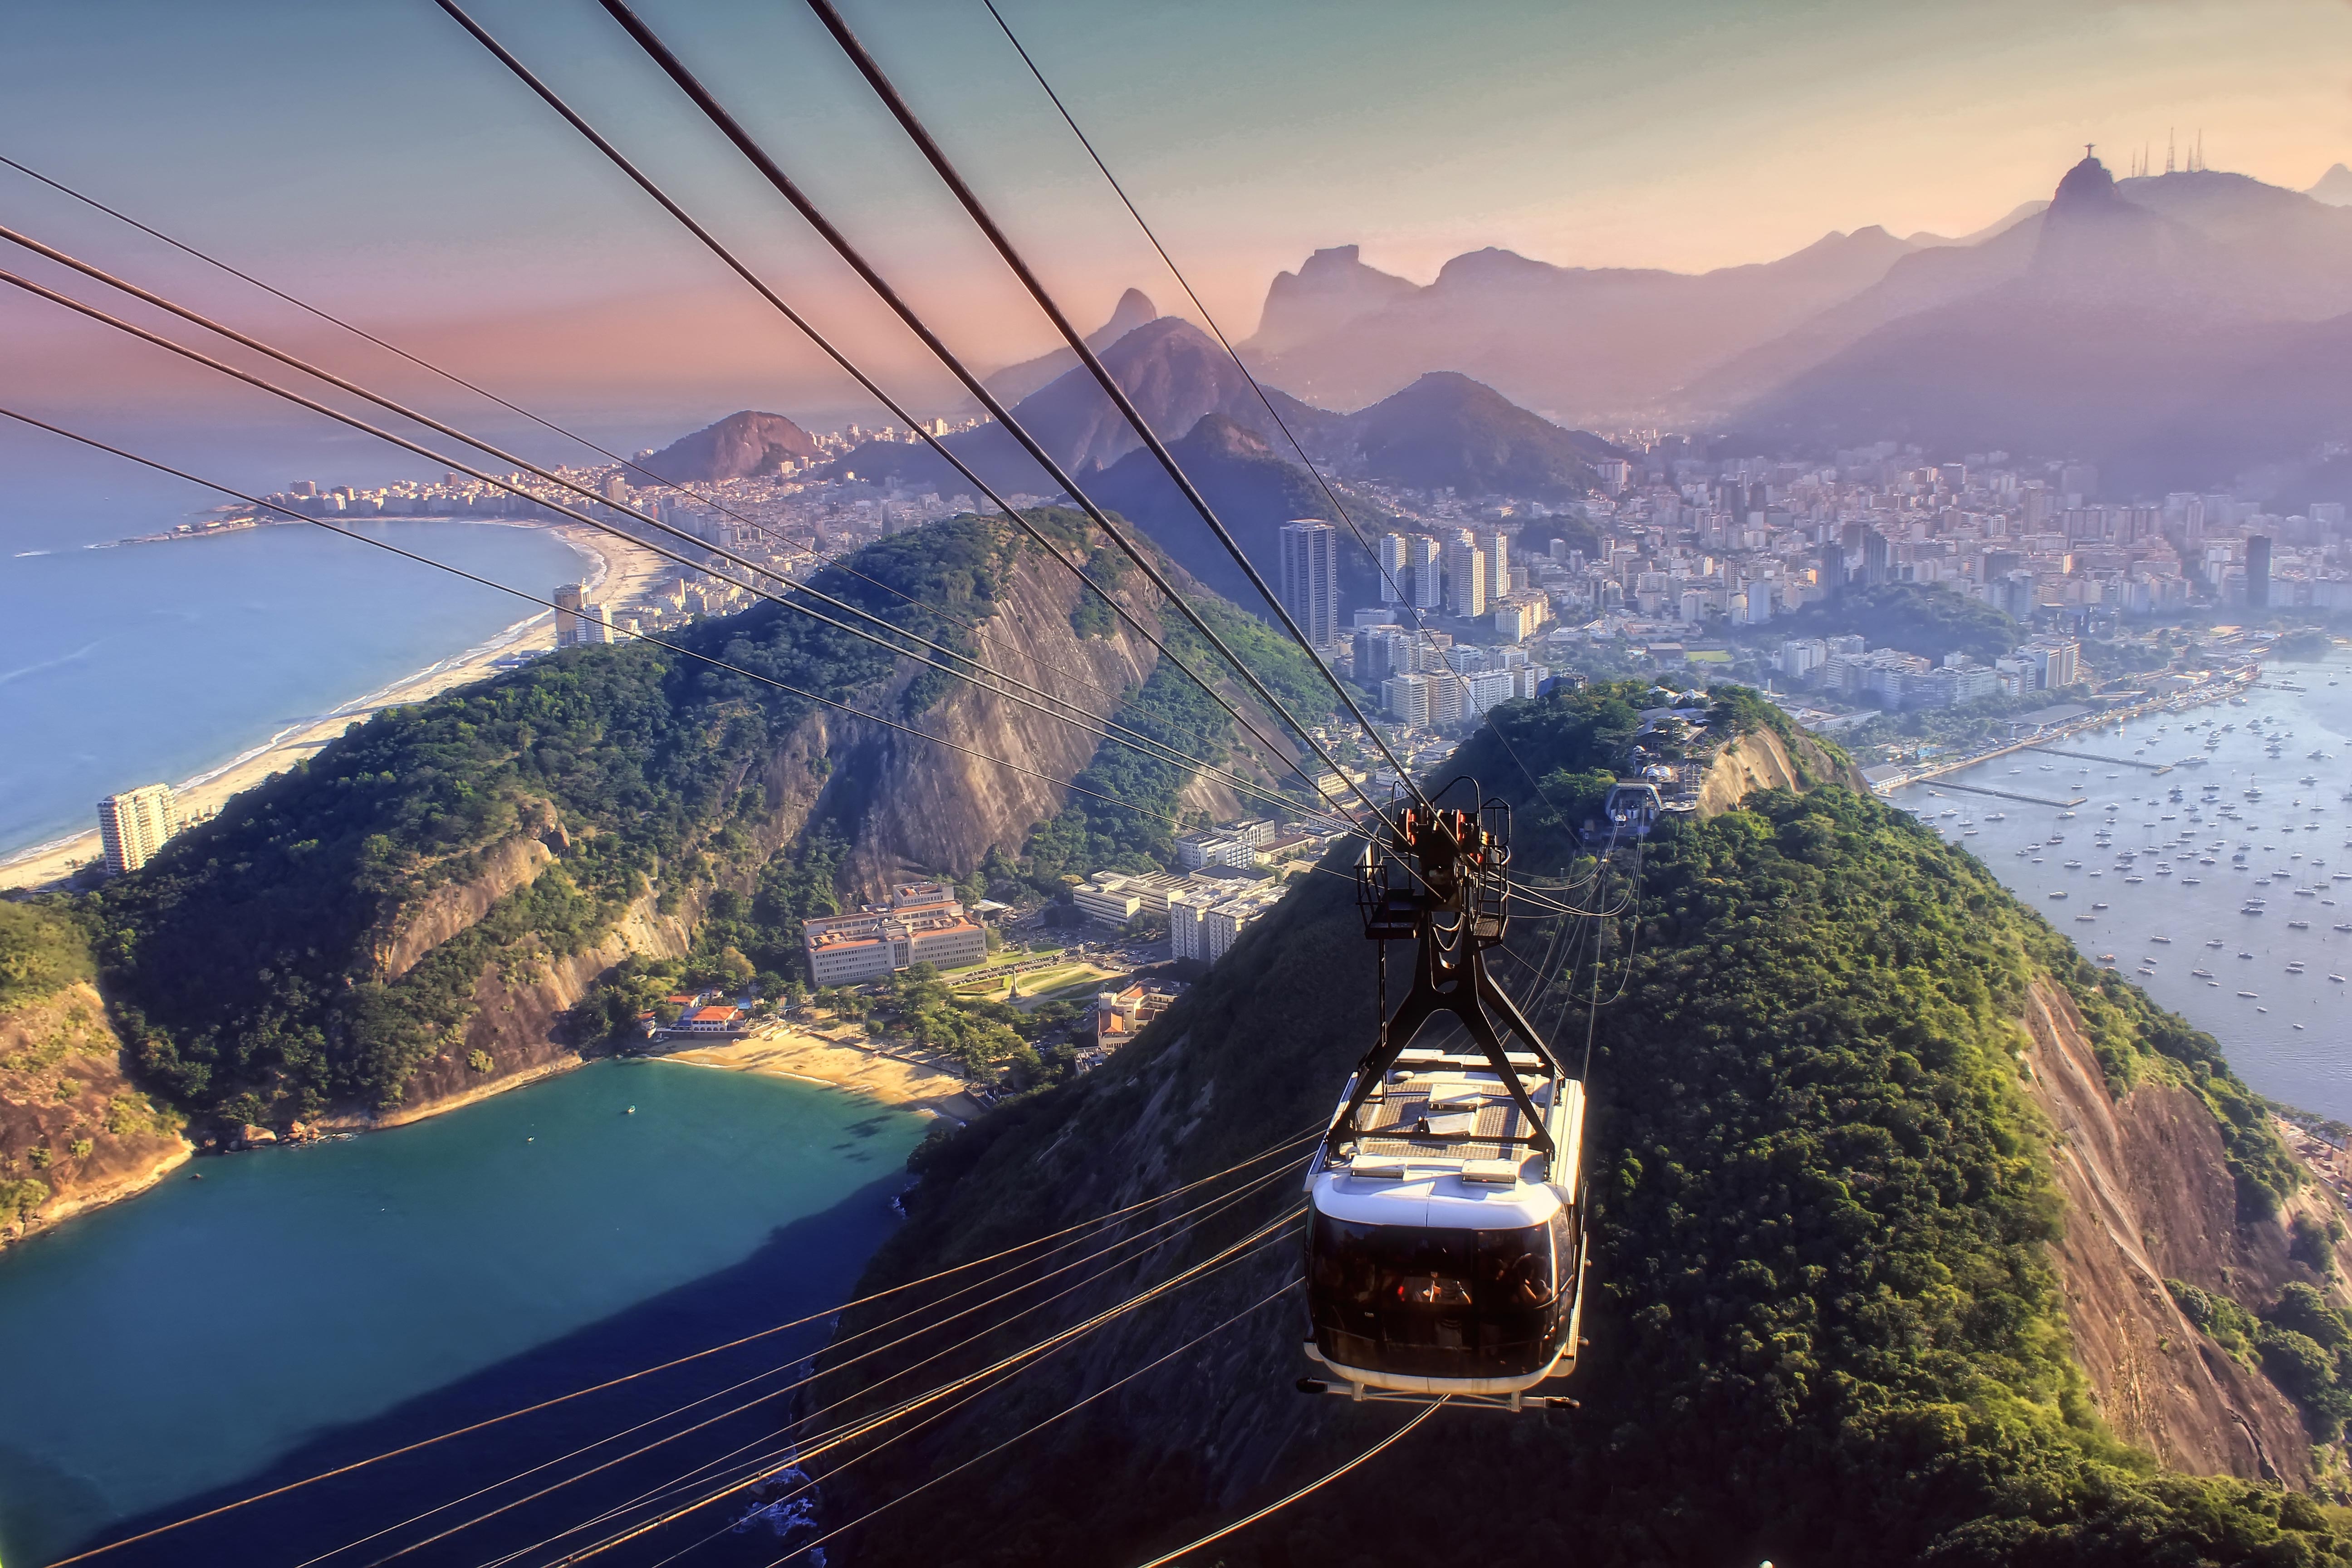 The Sugarloaf cable car opened in 1912 and runs every 30 minutes. Image by Antonello / Moment Select / Getty